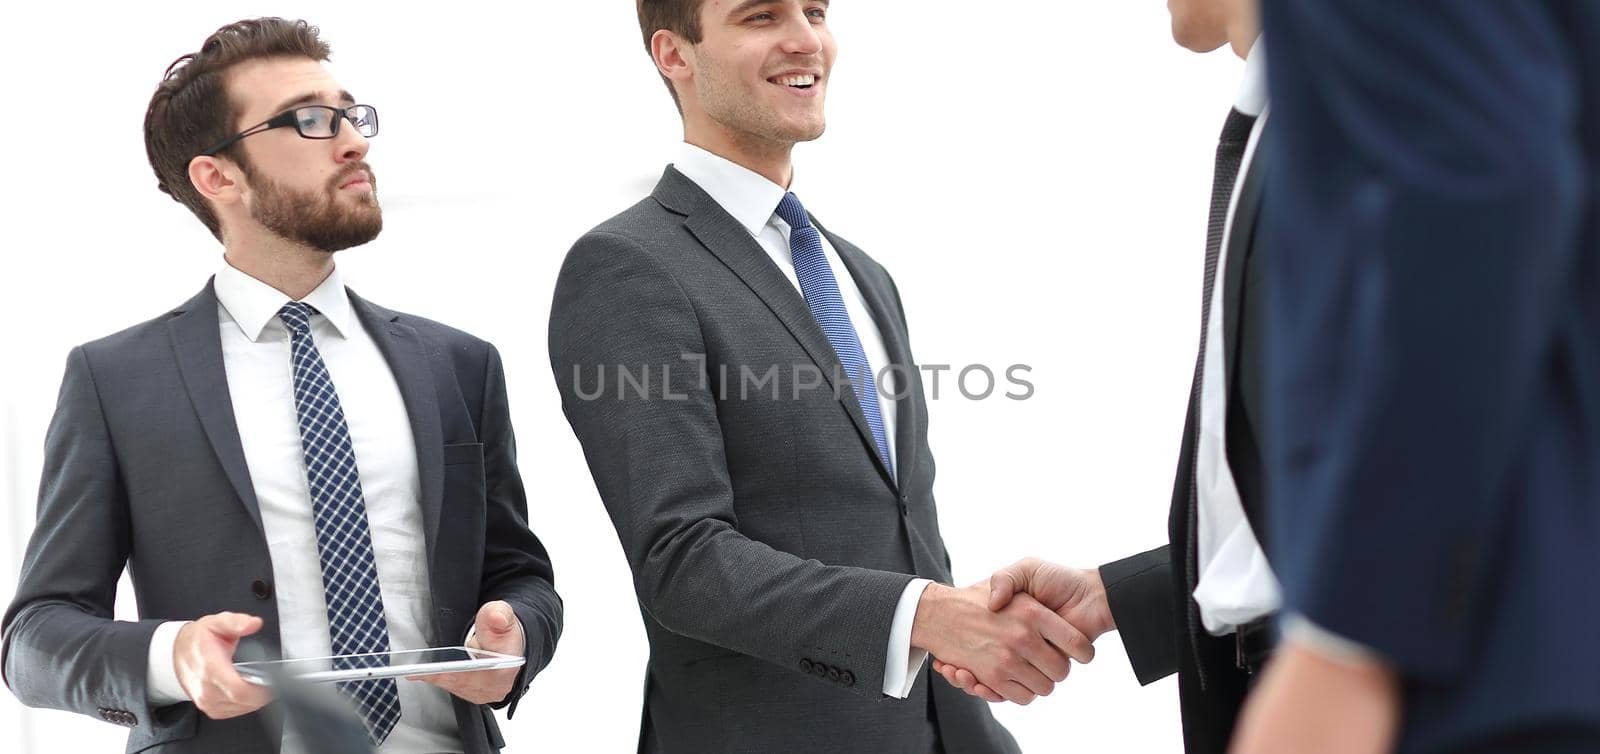 Business associates shaking hands in office.